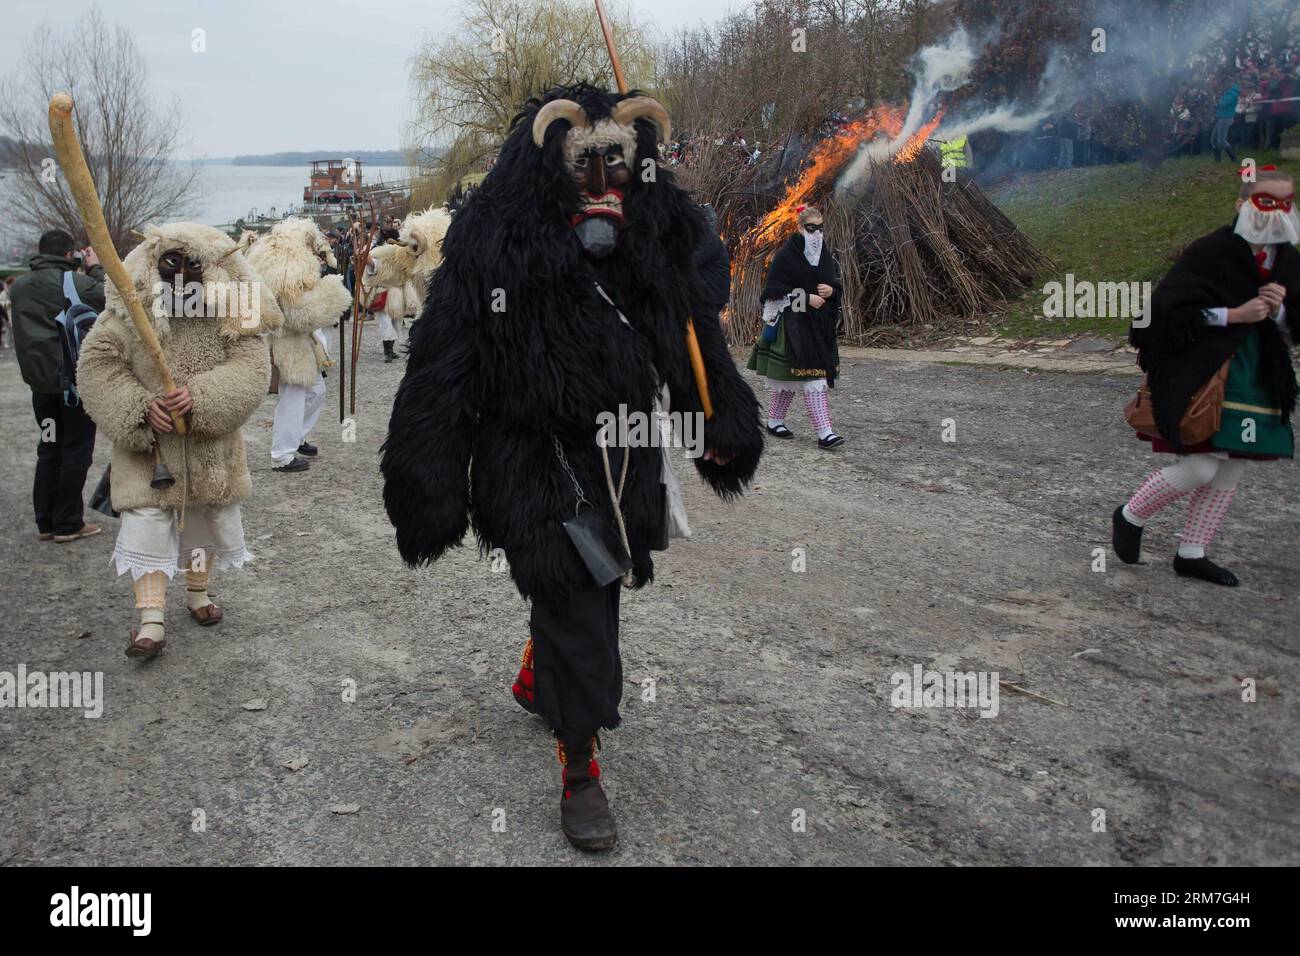 Masked busos (people wearing sheep fur and wooden masks) celebrate the traditional Buso Carnival in Mohacs, southern Hungary on March 2, 2014. The Buso Carnival is an annual celebration of Sokac ethnic group living in Mohacs to bid farewell to winter and welcome spring. According to legend, local people dressed up in sheep fur and wooden masks in a bid to frighten off the Turkish invaders in the 16th century. This year s carnival takes place from February 27 till March 4. (Xinhua/Attila Volgyi) HUNGARY-MOHACS-BUSO CARNIVAL PUBLICATIONxNOTxINxCHN   Masked  Celebrities Wearing Sheep for and Wood Stock Photo